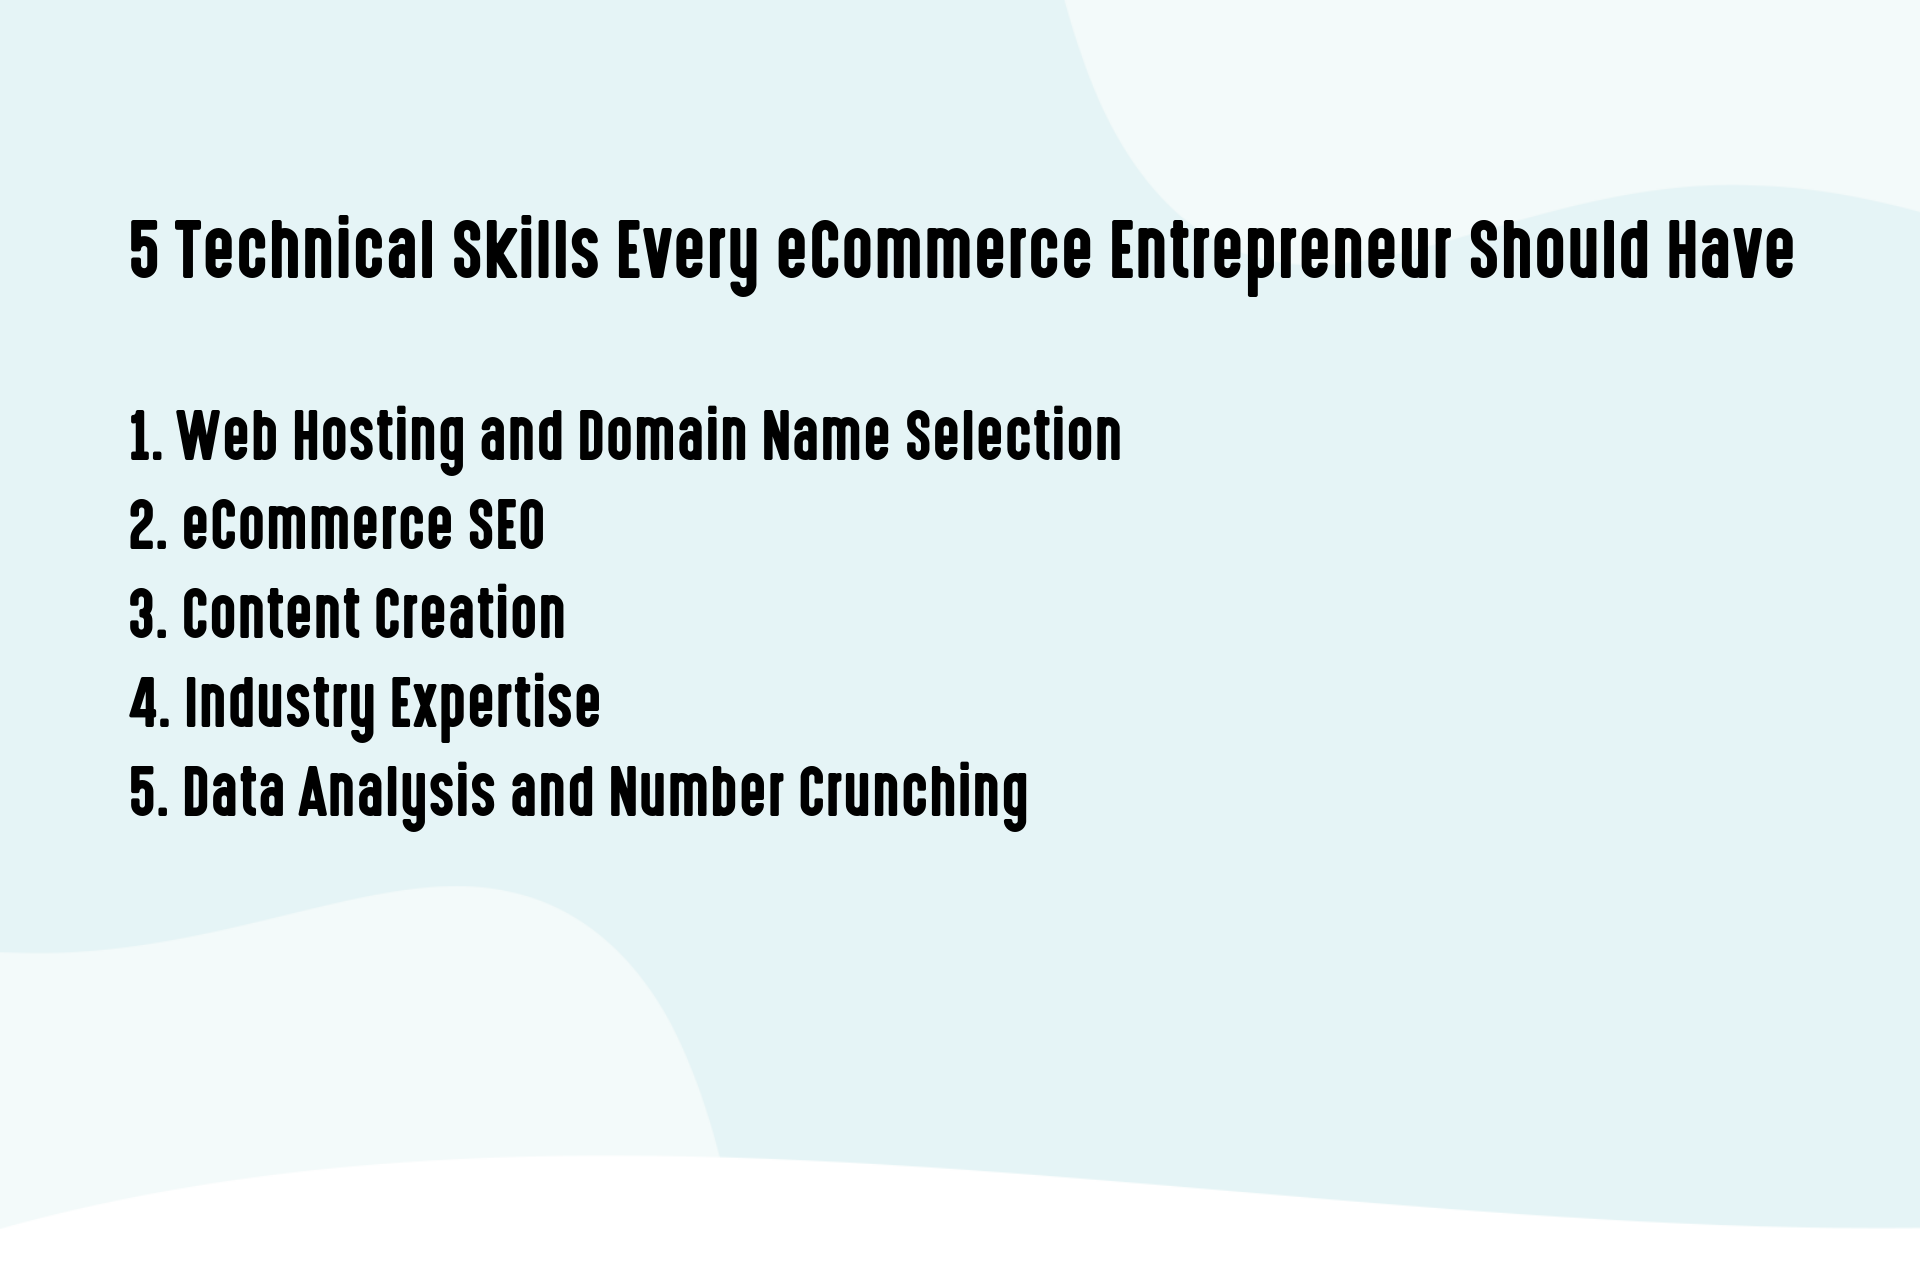 5 Technical Skills Every eCommerce Entrepreneur Should Have